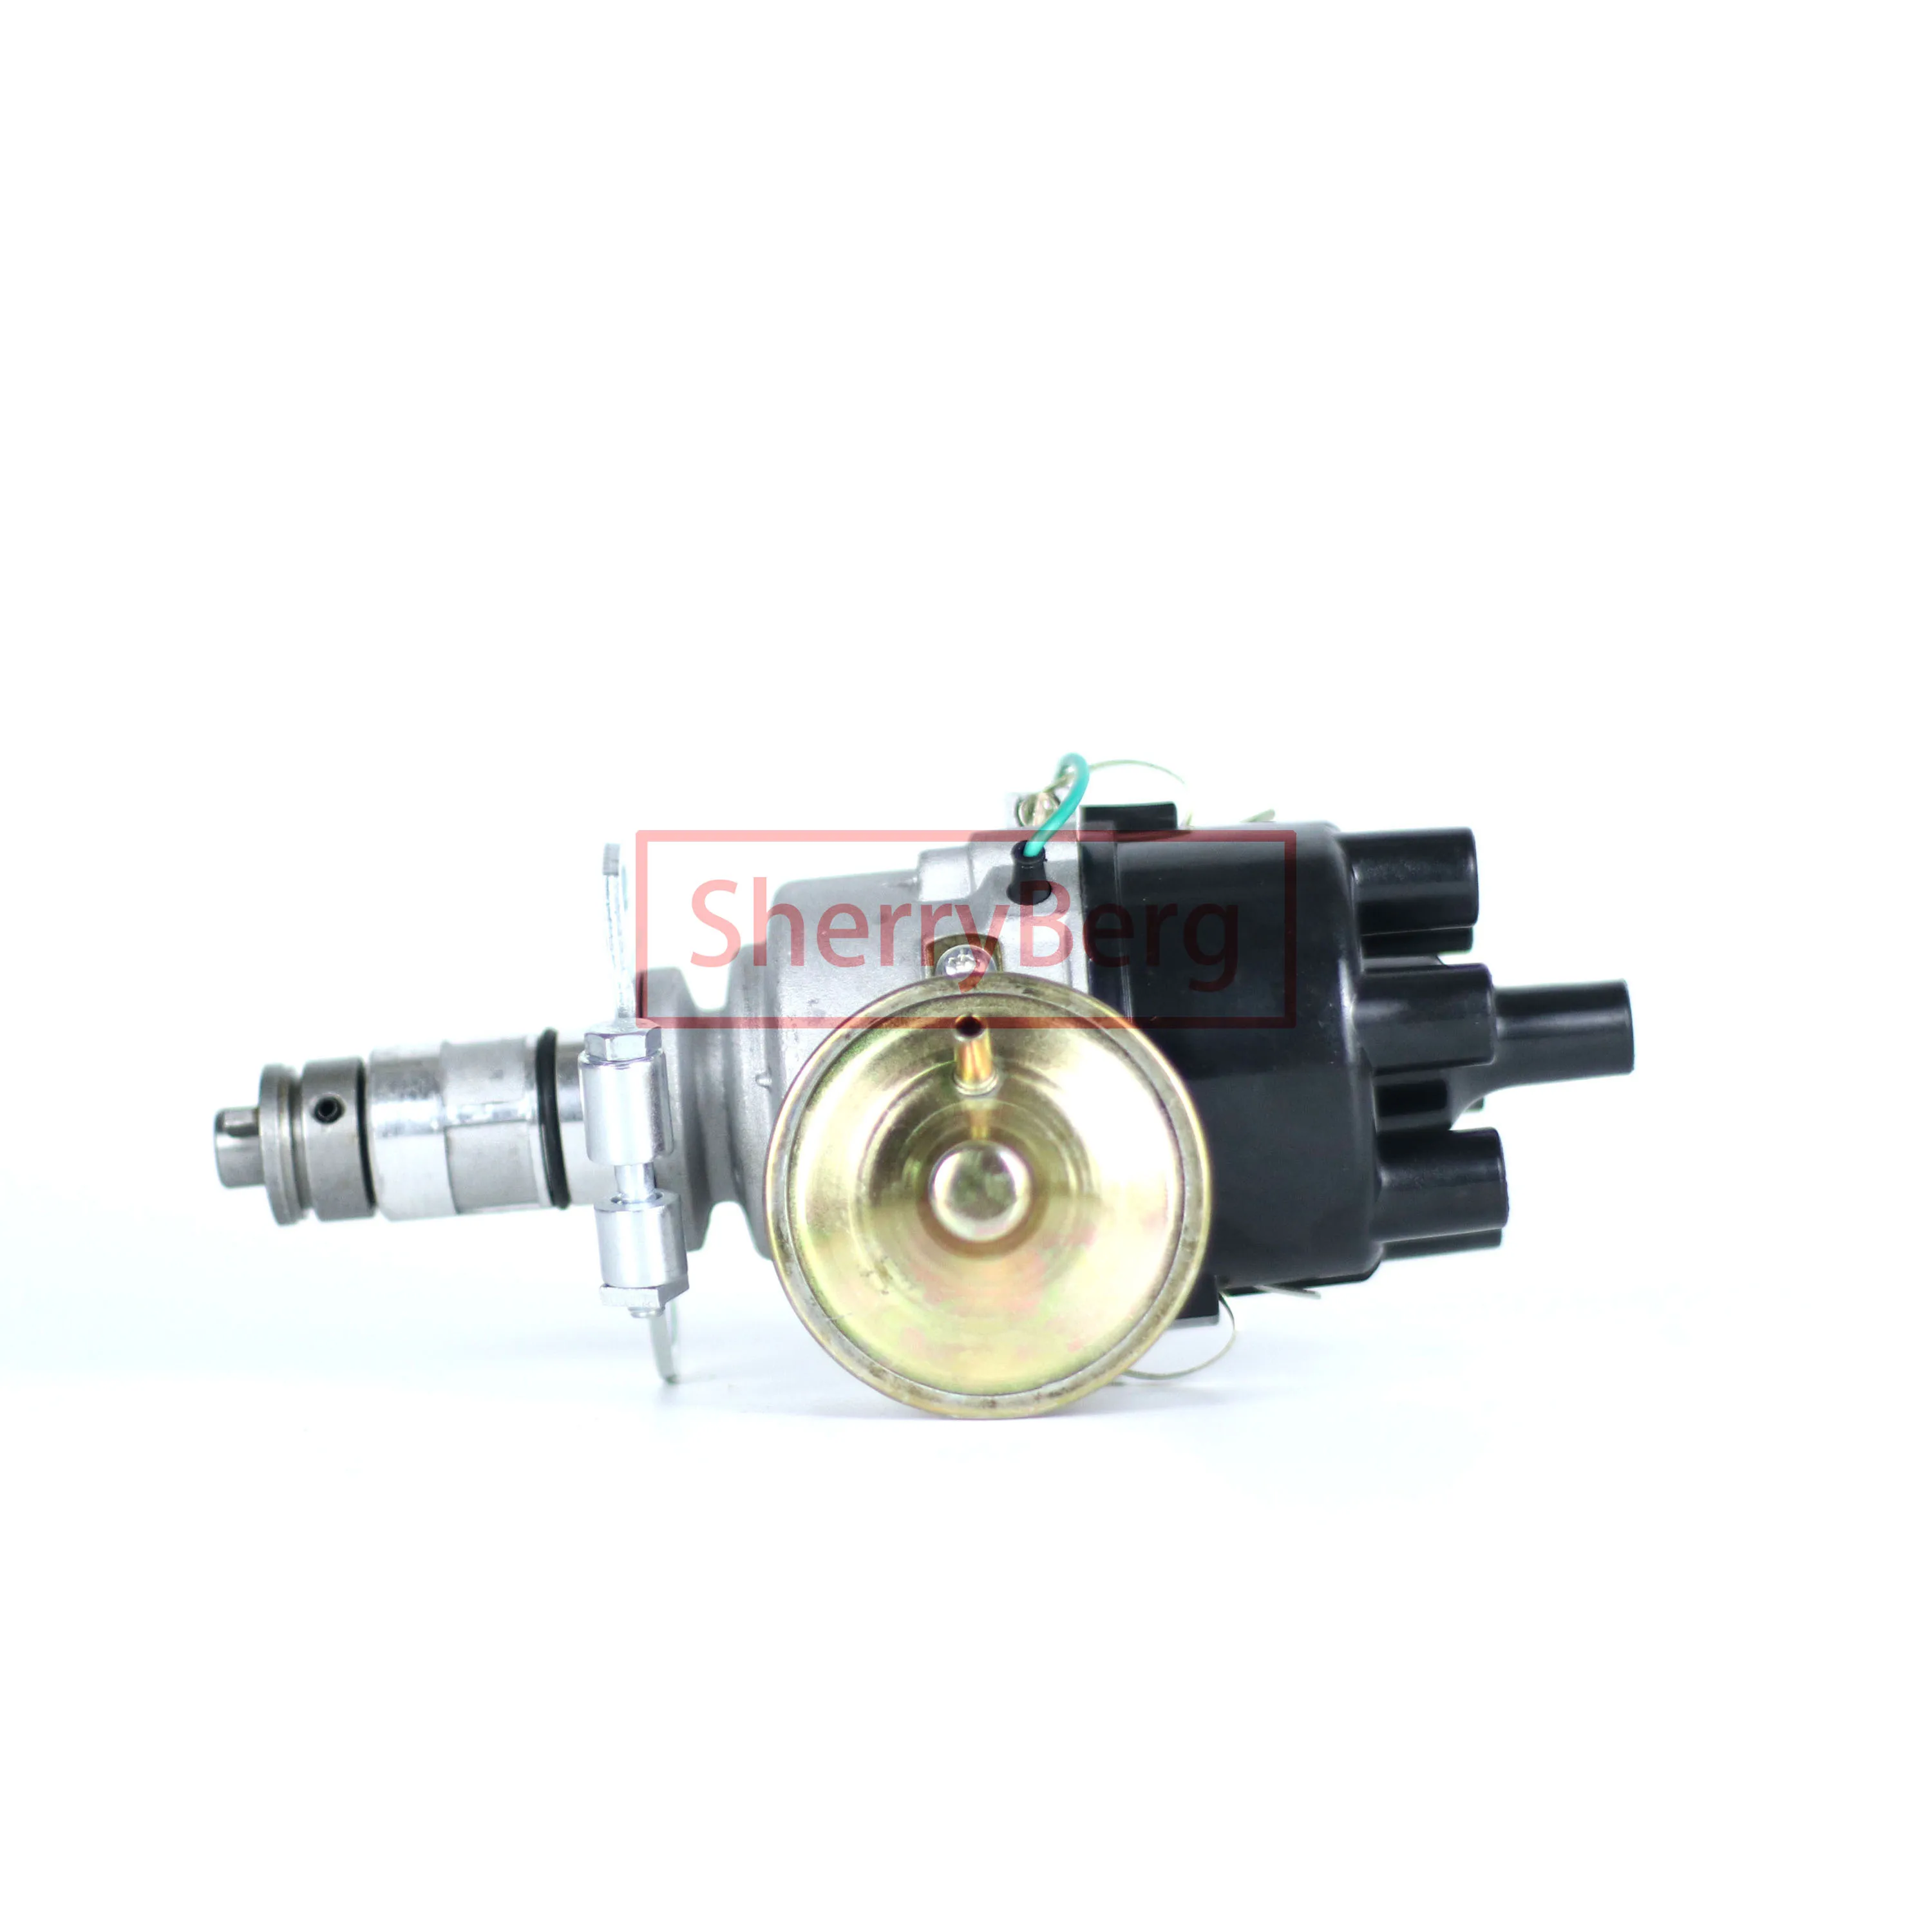 

SherryBerg New Point Distributor for Aston Martin DBS 4.0 1966 1967 1968 1969 1970 1971 1972 IGNITION (Rep. Lucas 45D6 type)